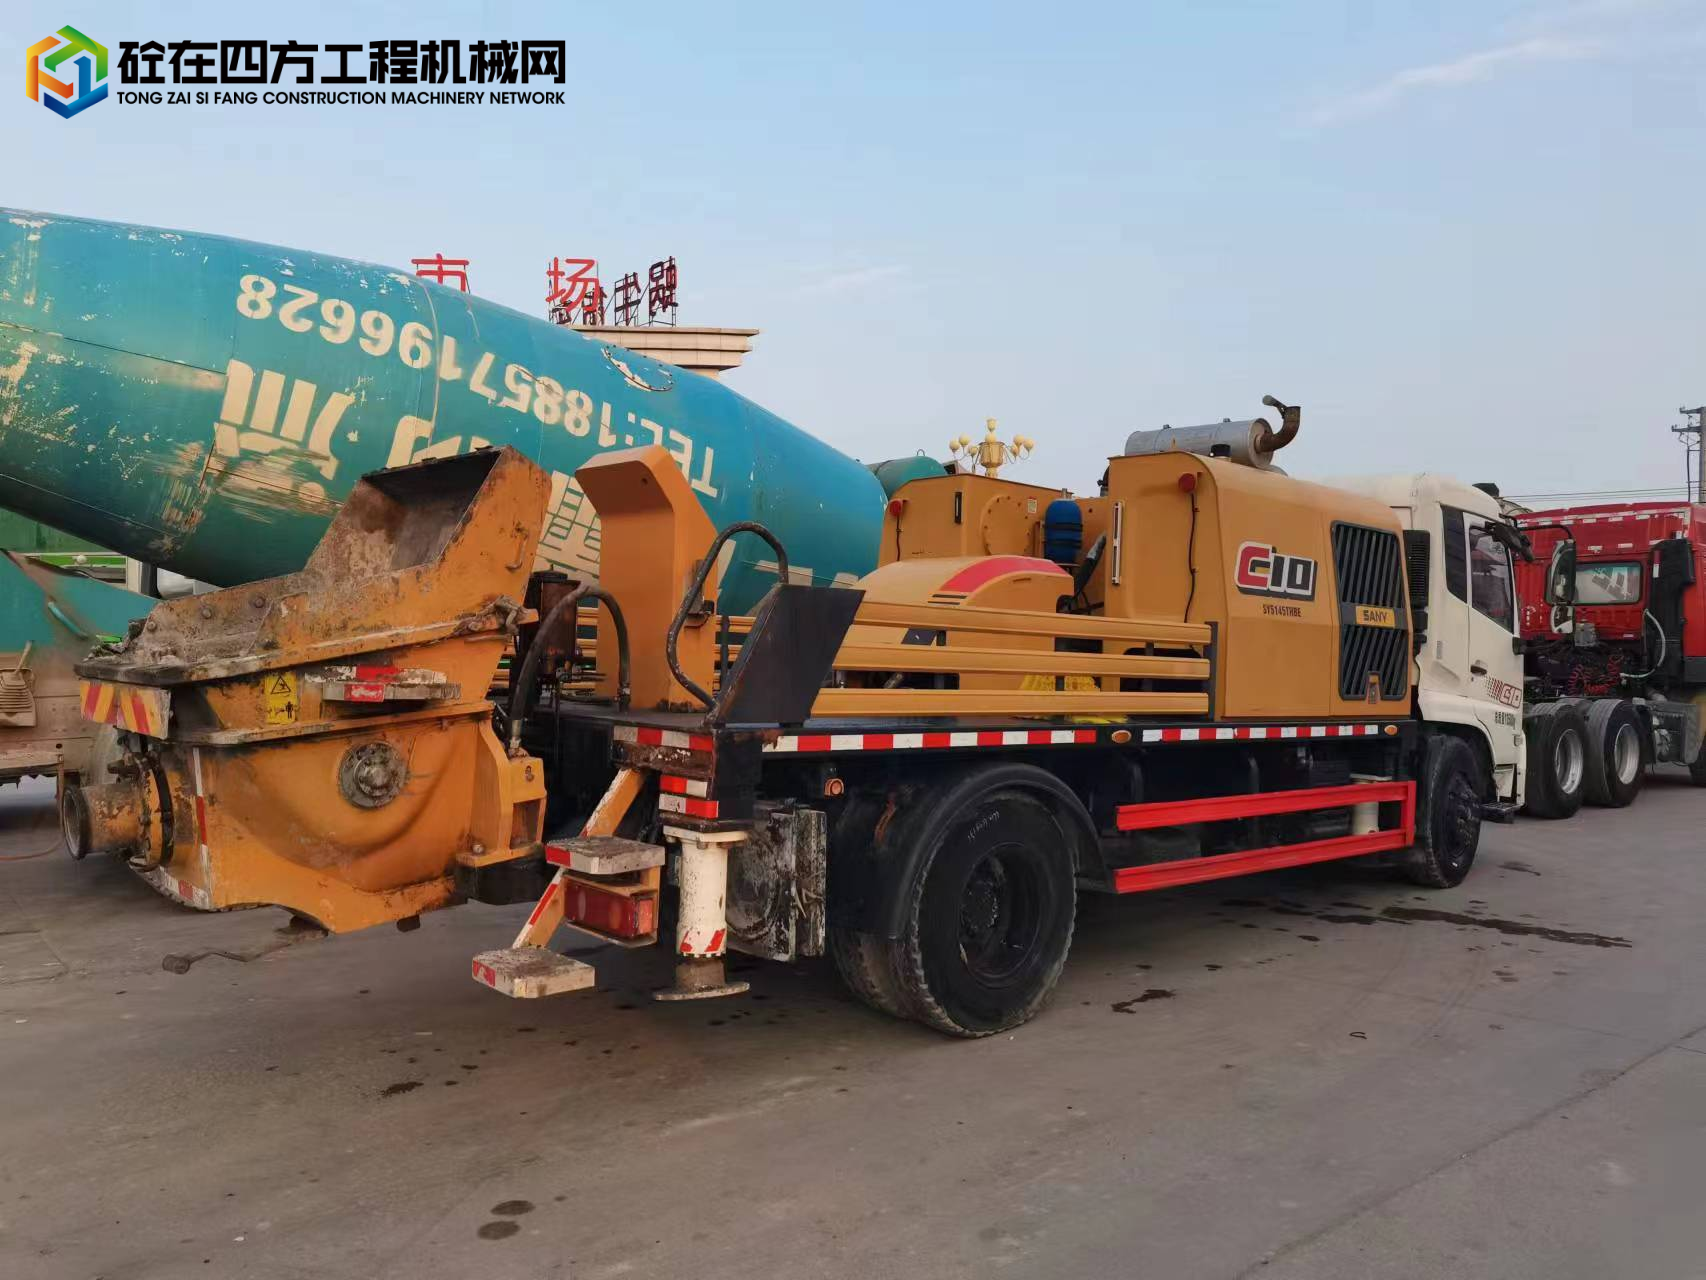 https://images.tongzsf.com/tong/truck_machine/20230426/16448bbaed7e16.jpg